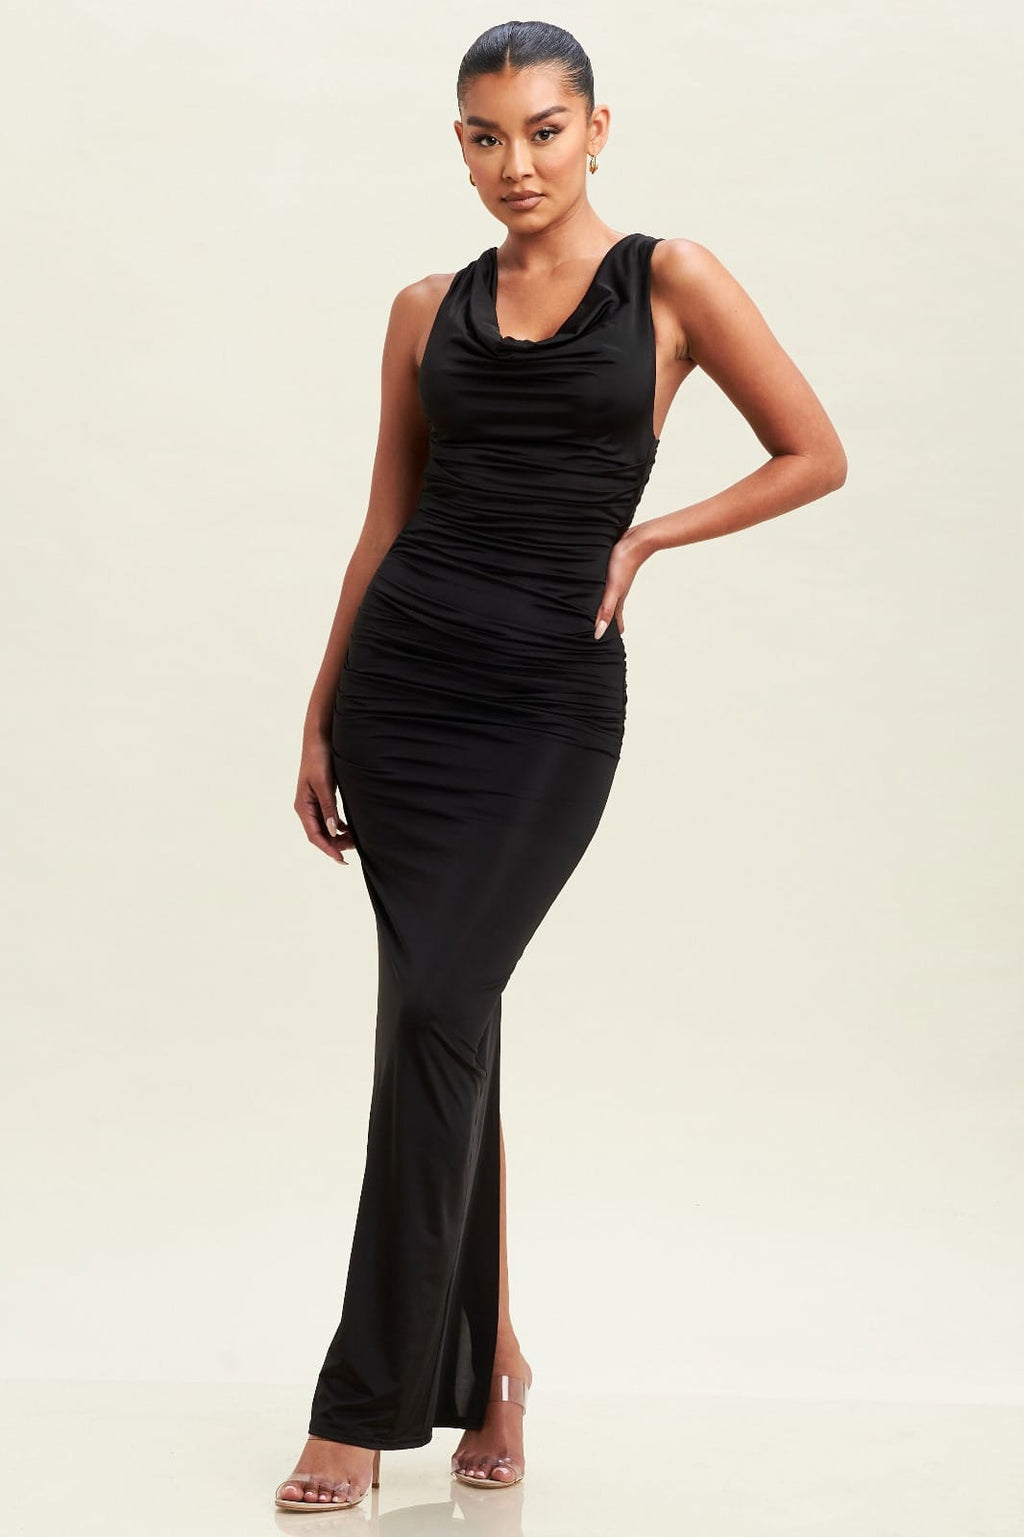 BLACK SIMPLE LONG DRESS WITH OPEN TIE BACK